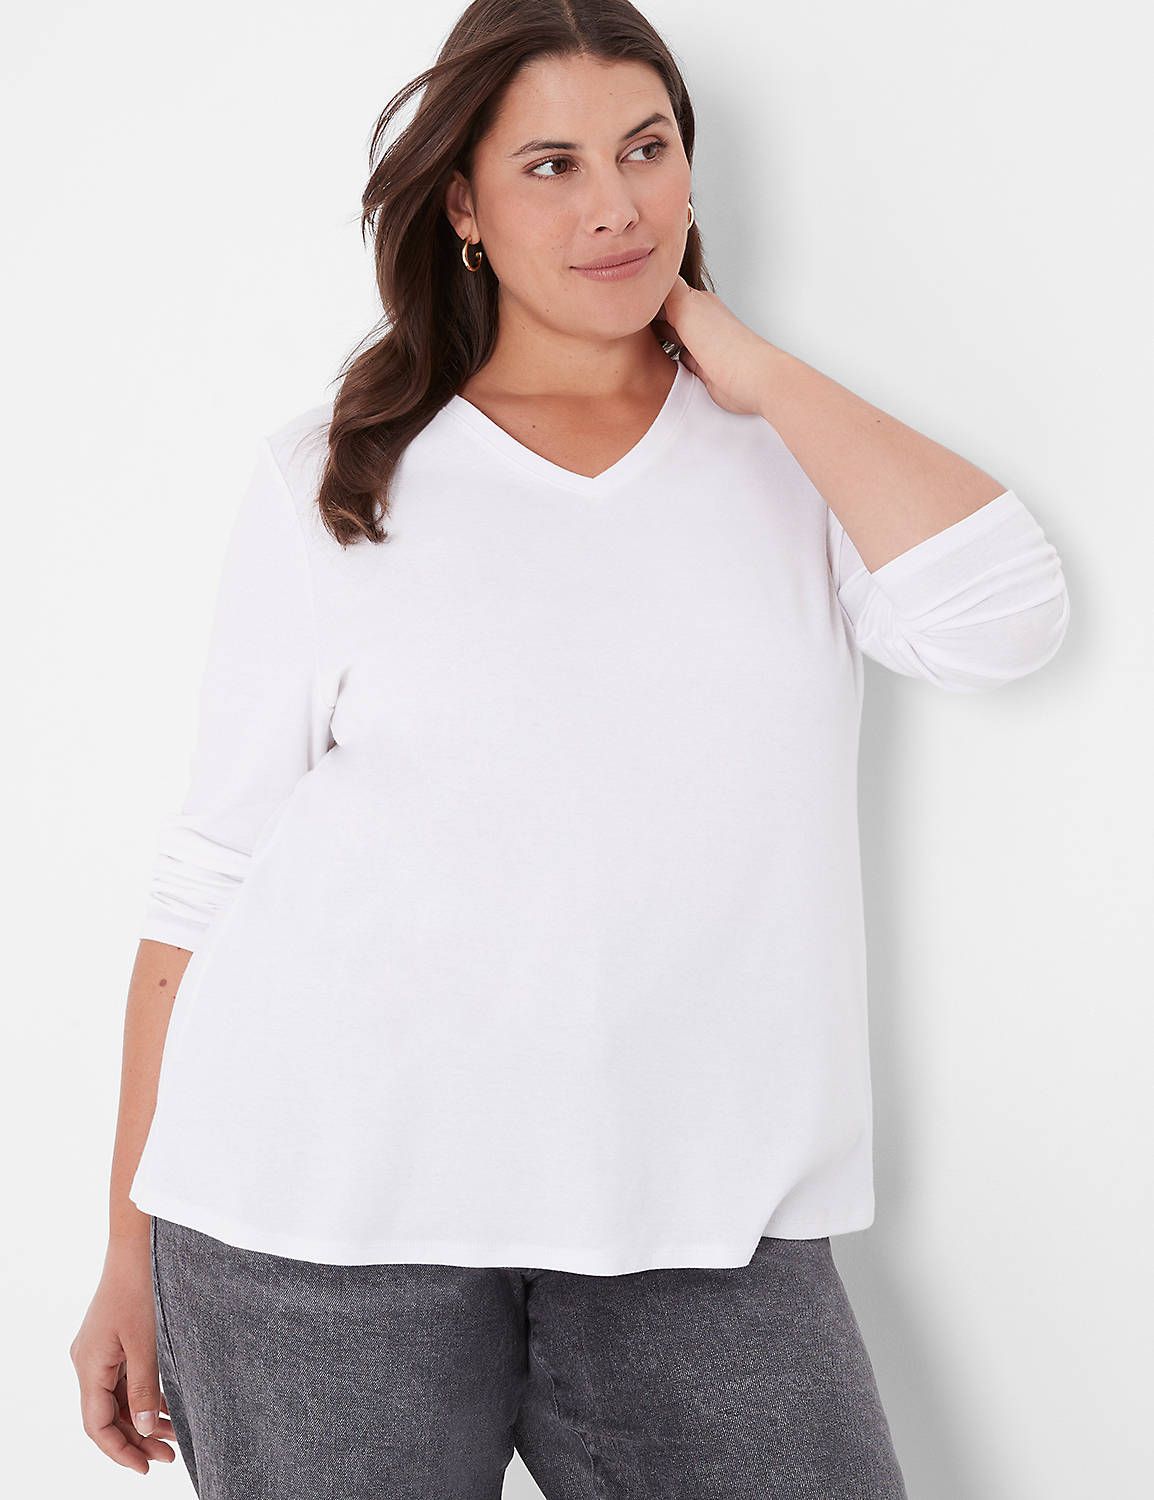 Classic LS V Neck Tee 1138413 Copy Product Image 1